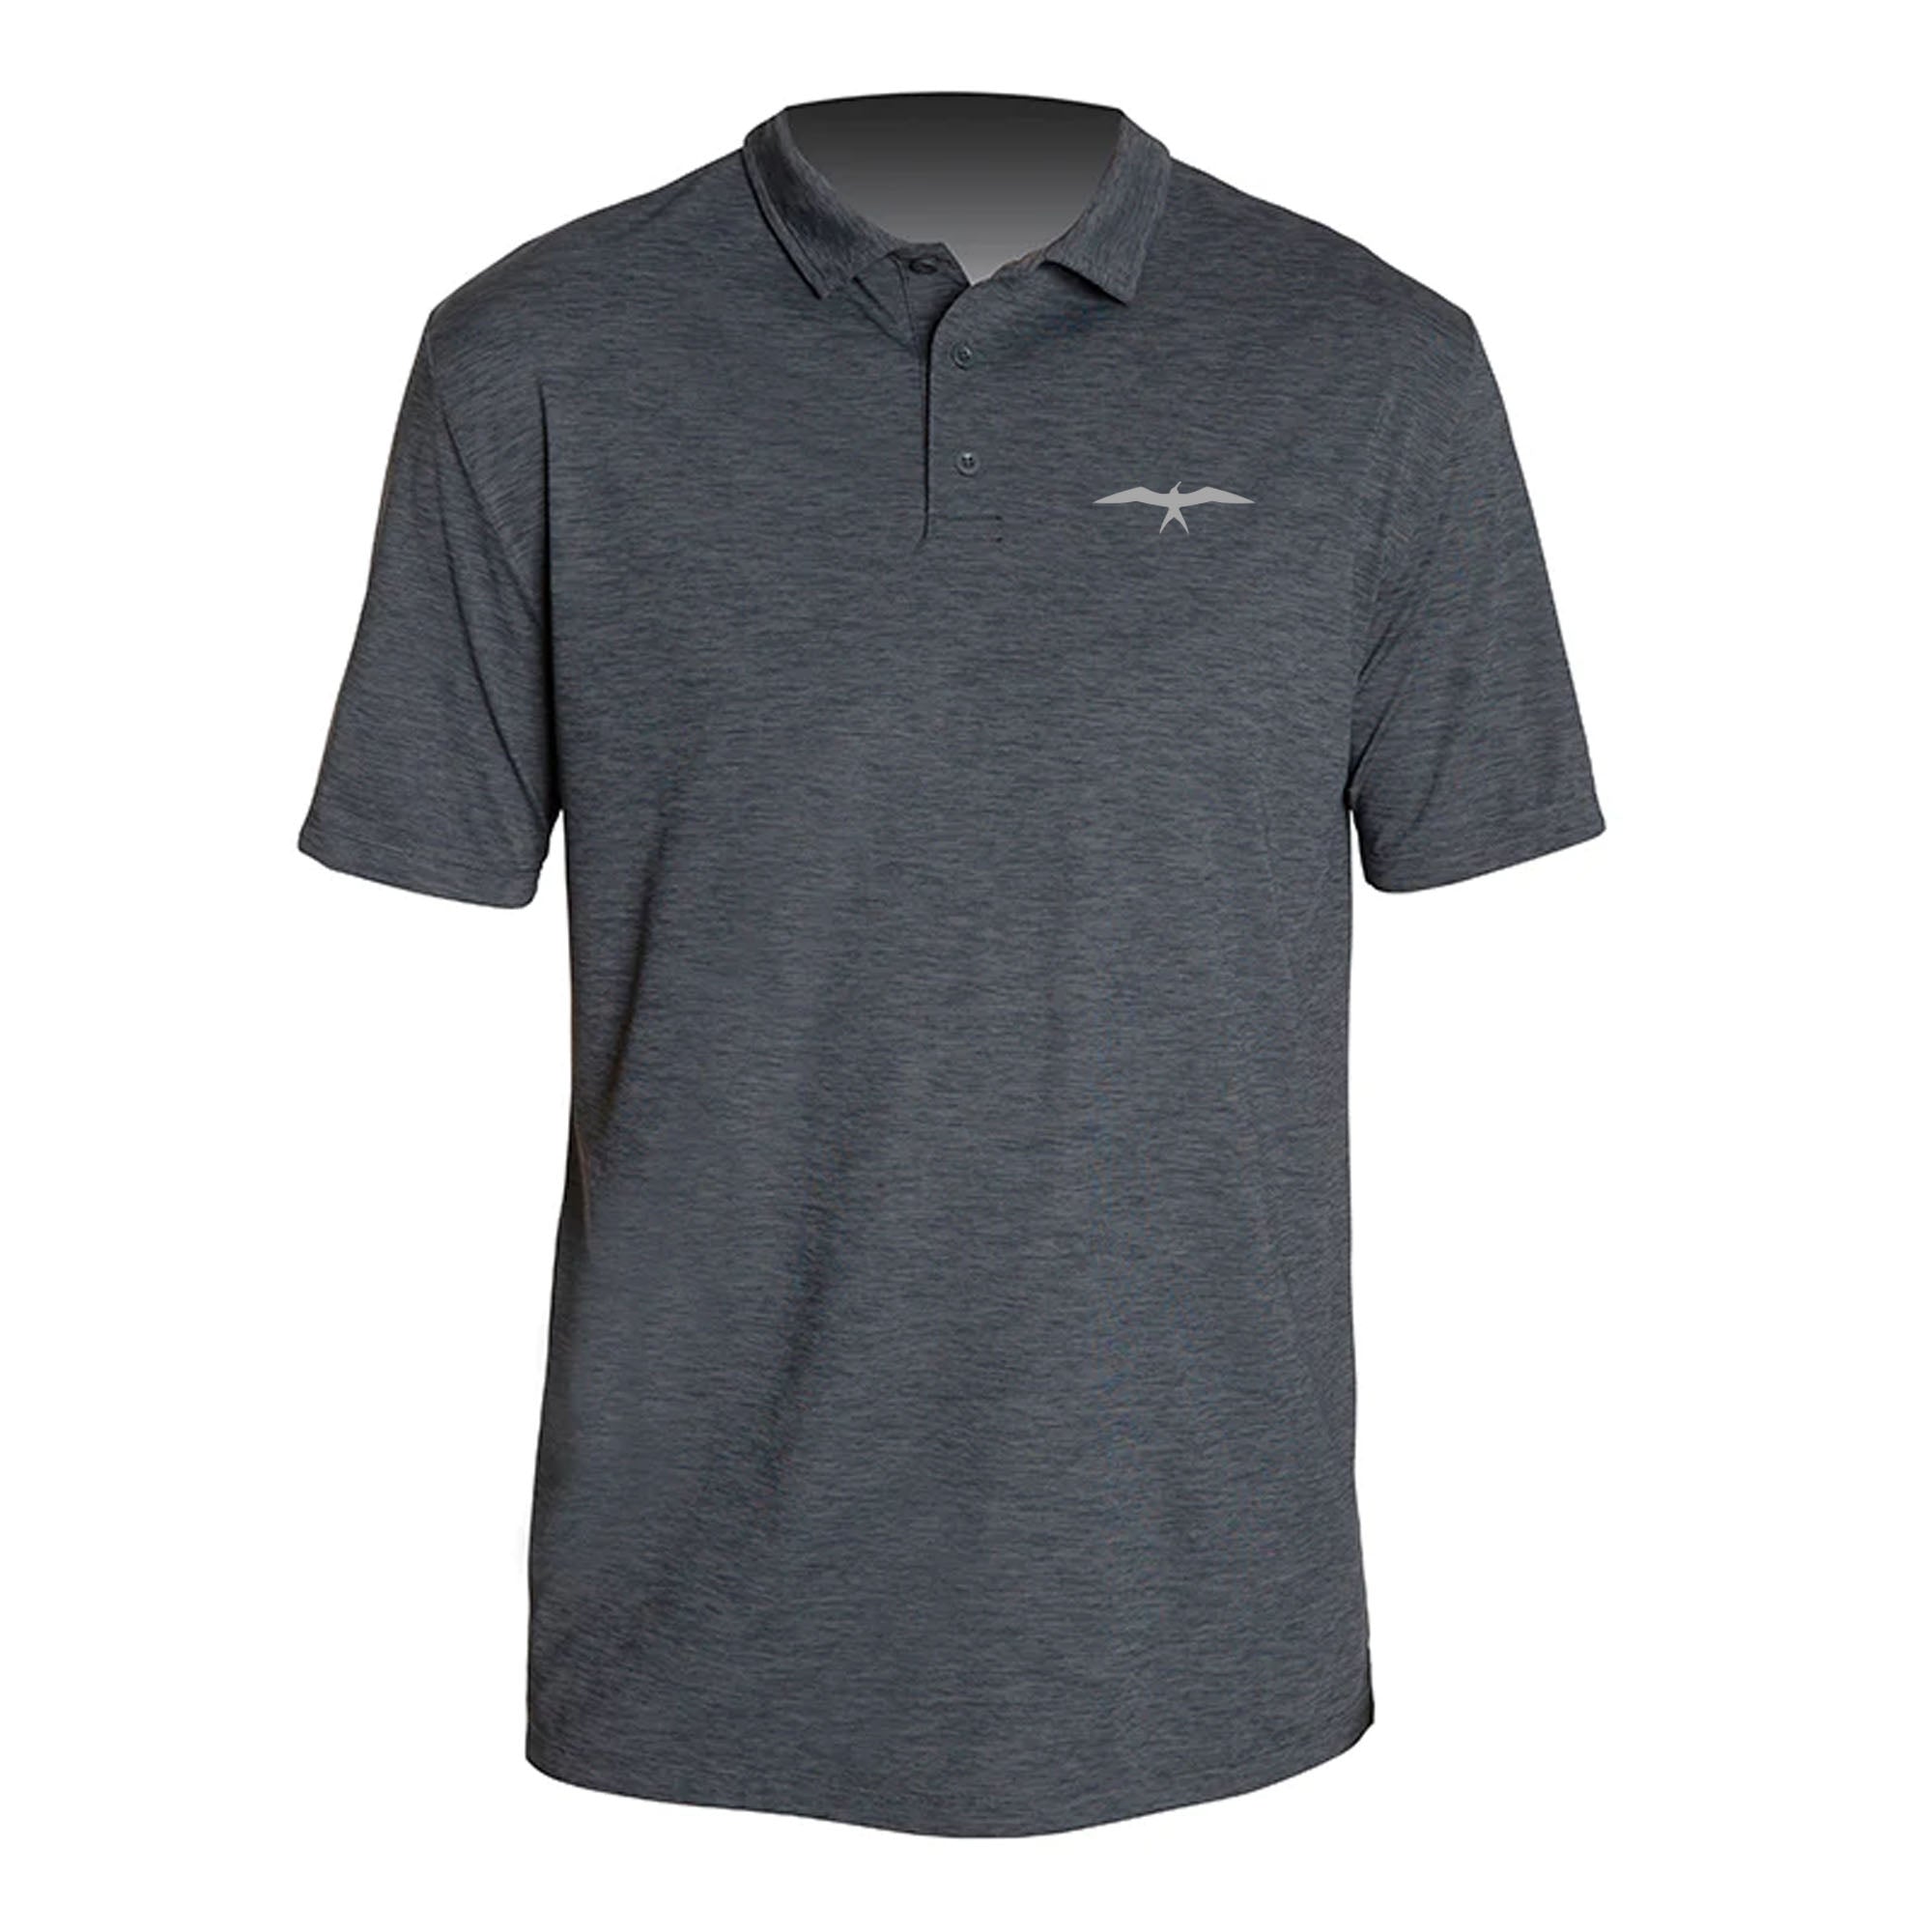 Invincible Anetik Low Pro Tech Polo S/S Charcoal Heathered